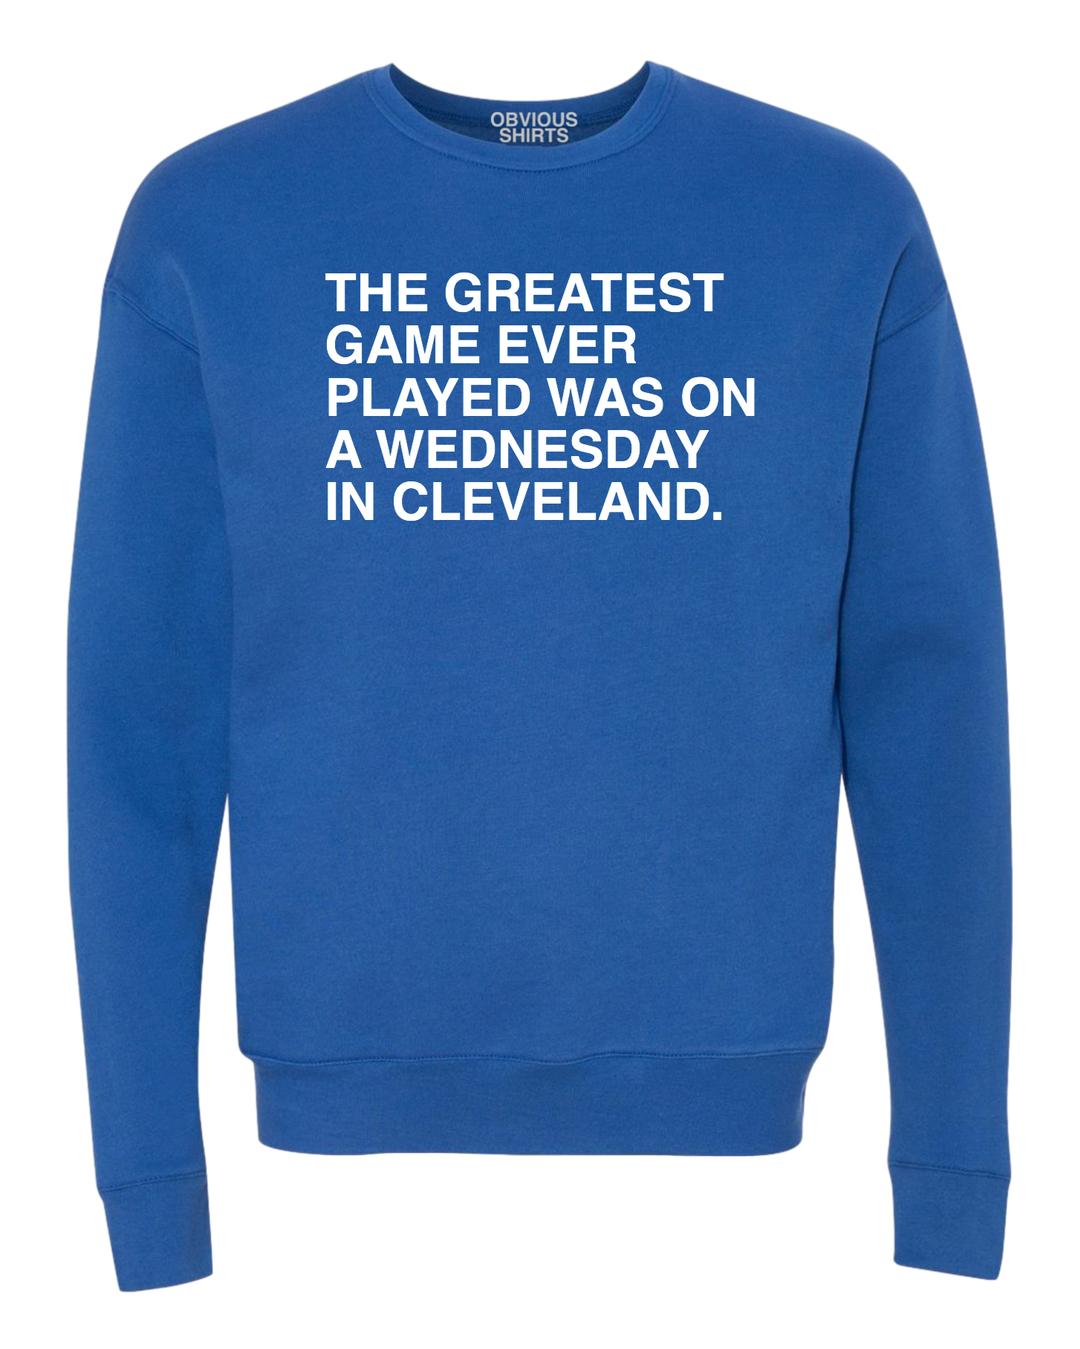 THE GREATEST GAME EVER PLAYED. (CREW SWEATSHIRT) - OBVIOUS SHIRTS.